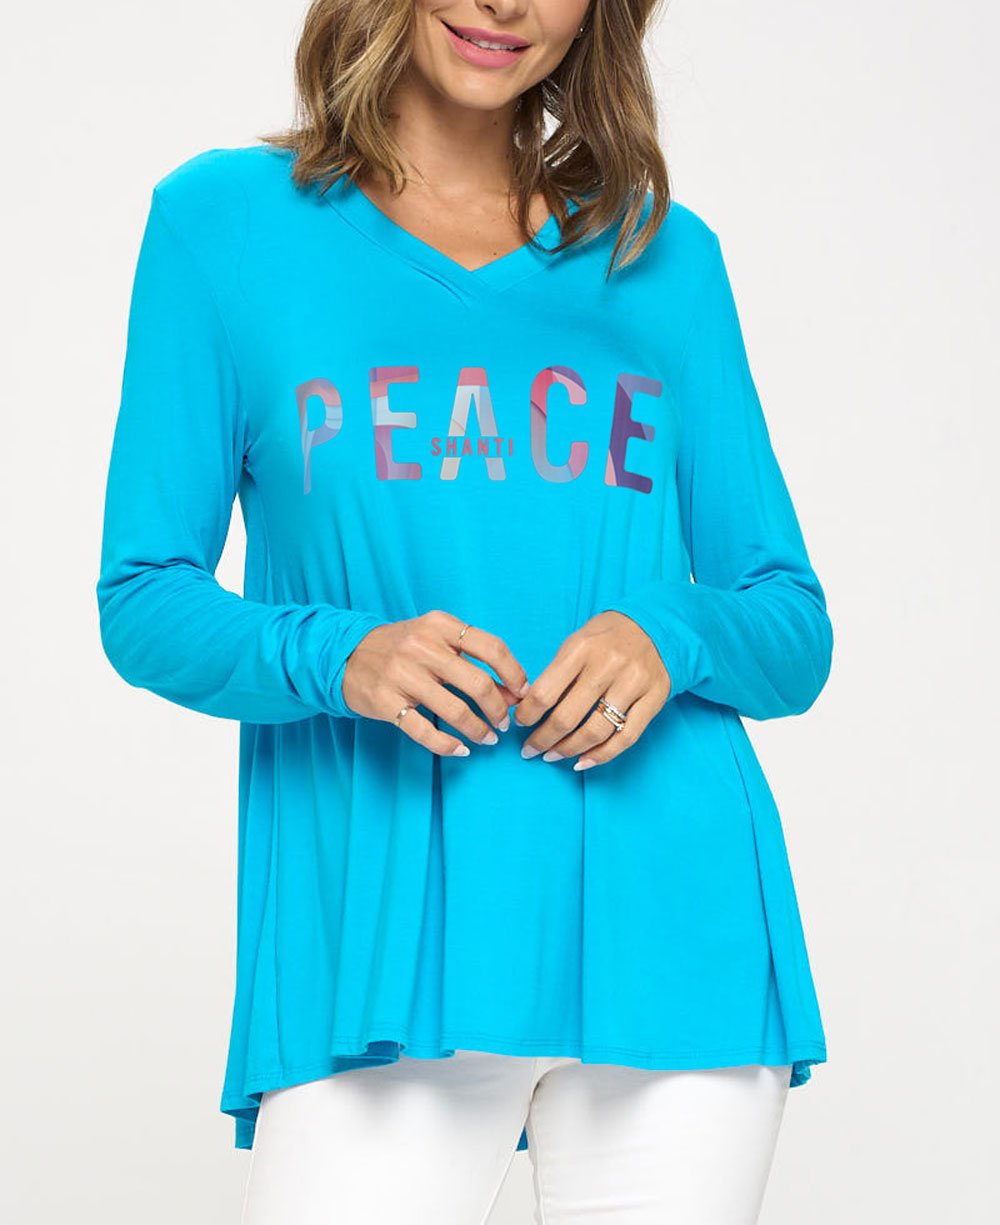 Fair Trade Organic Cotton Greatness Takes Time Long Sleeve Yoga